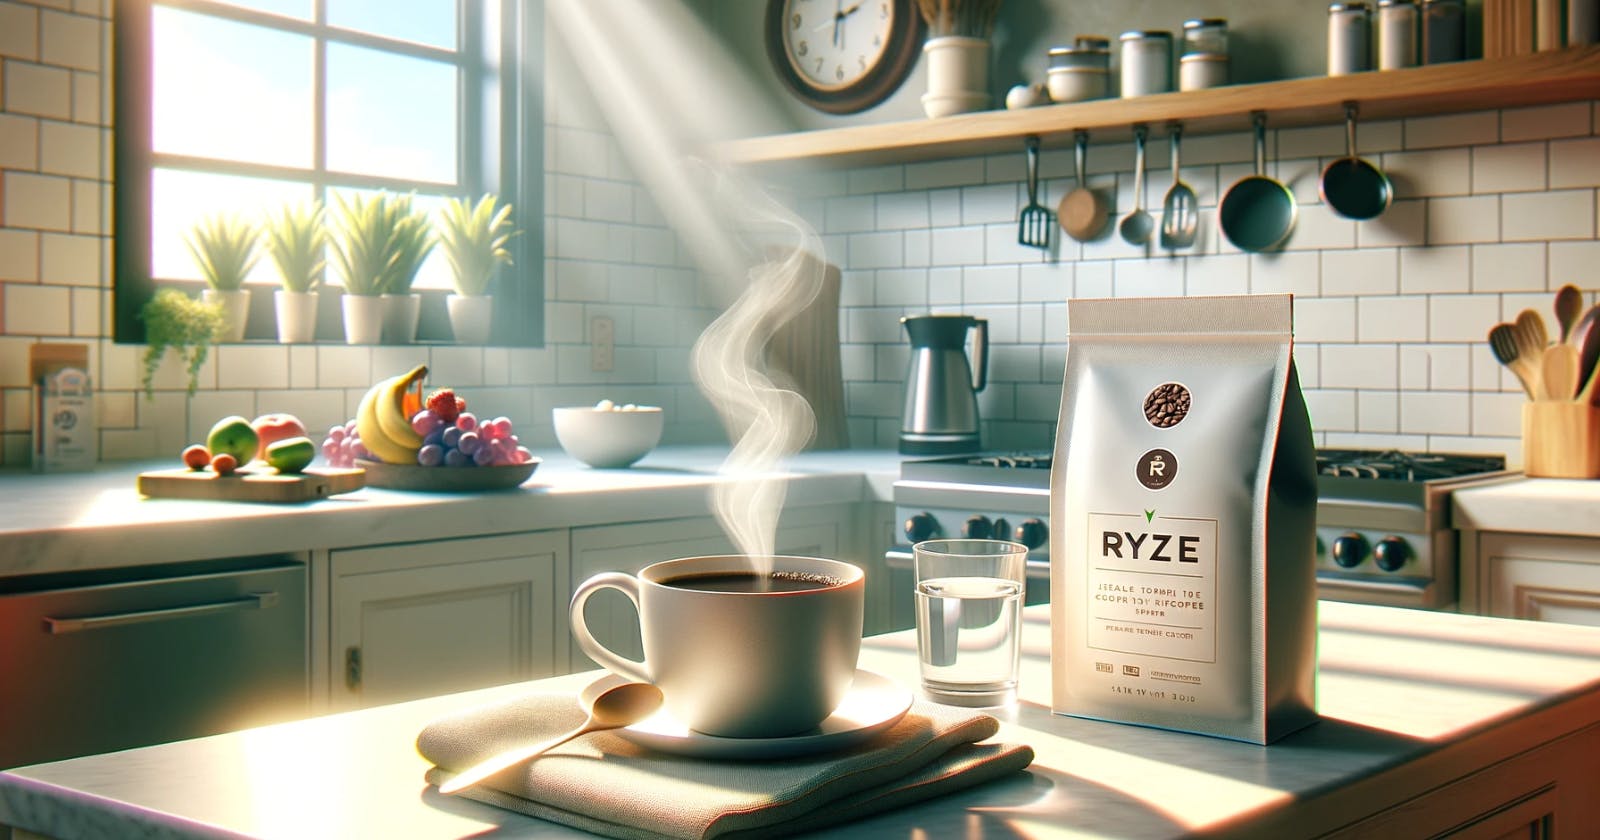 Is Ryze Coffee Good for You?